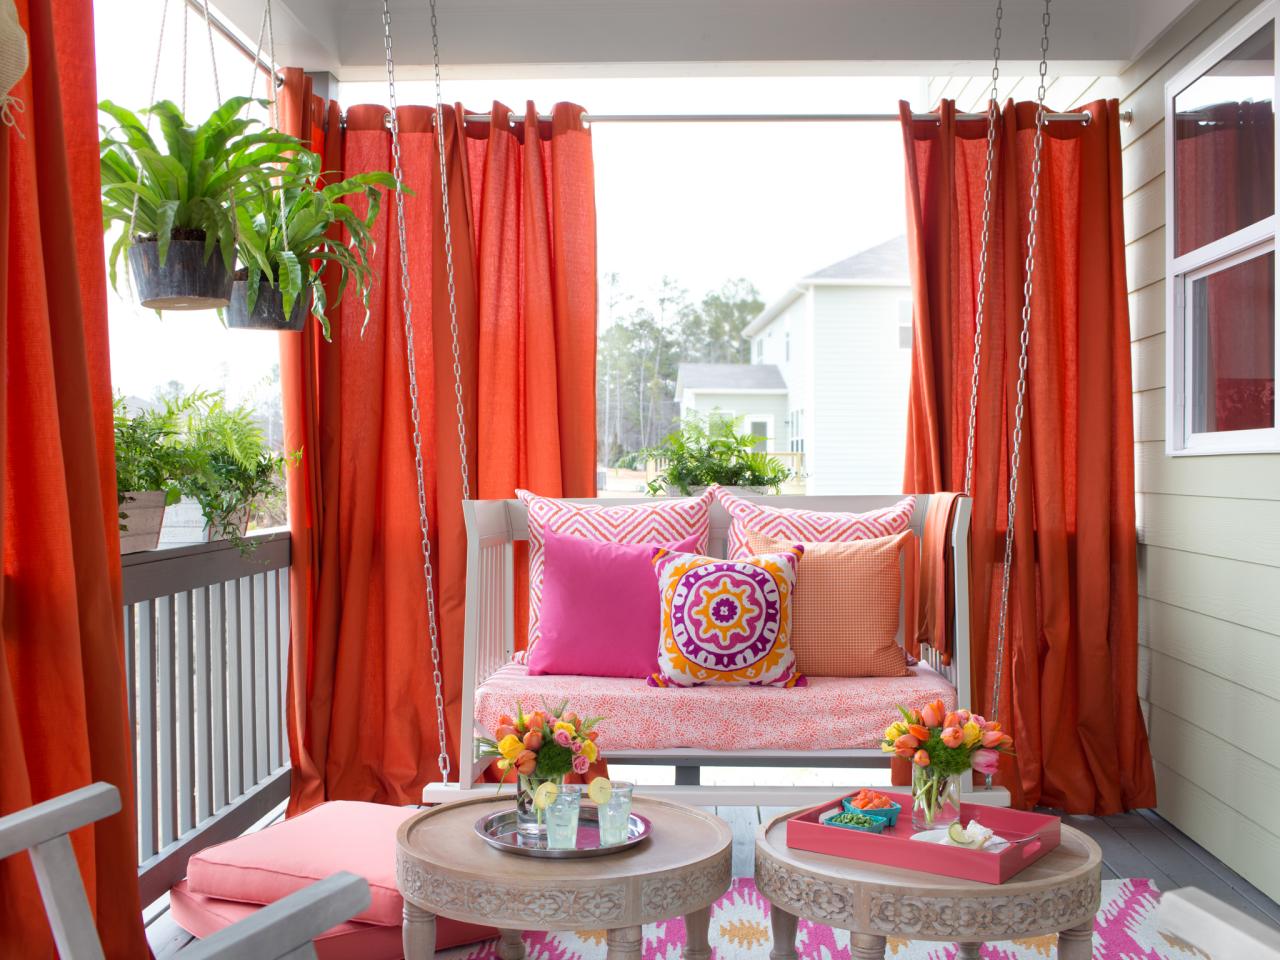 6 Creative Ways To Freshen Up Your Front Porch On A Budget